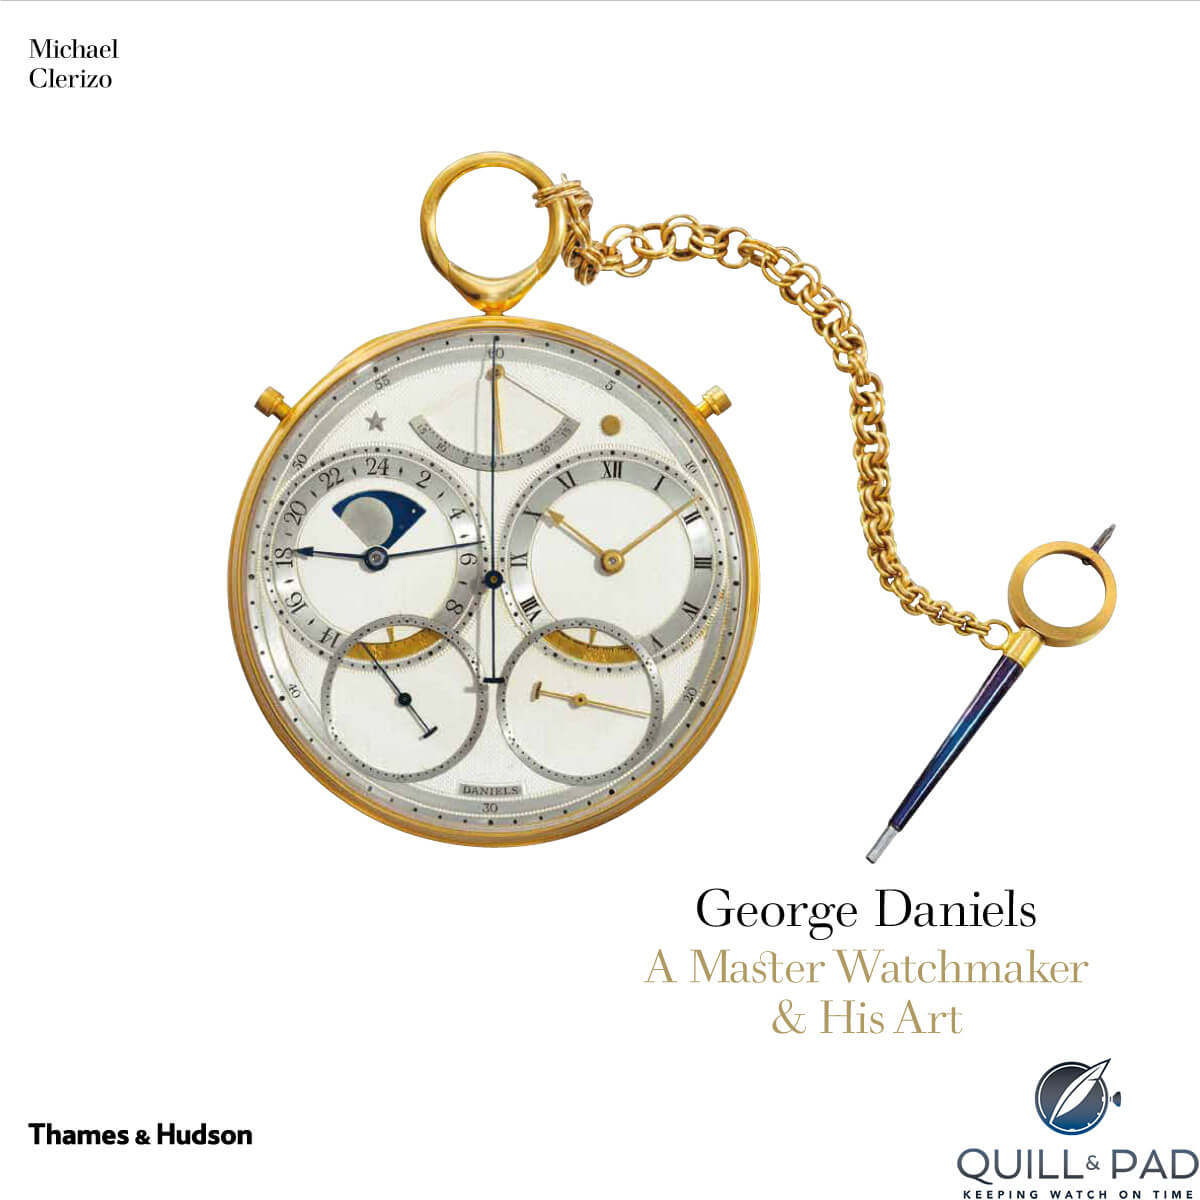 Cover of Michael Clerizo's book, ‘George Daniels, A Master Watchmaker & His Art’